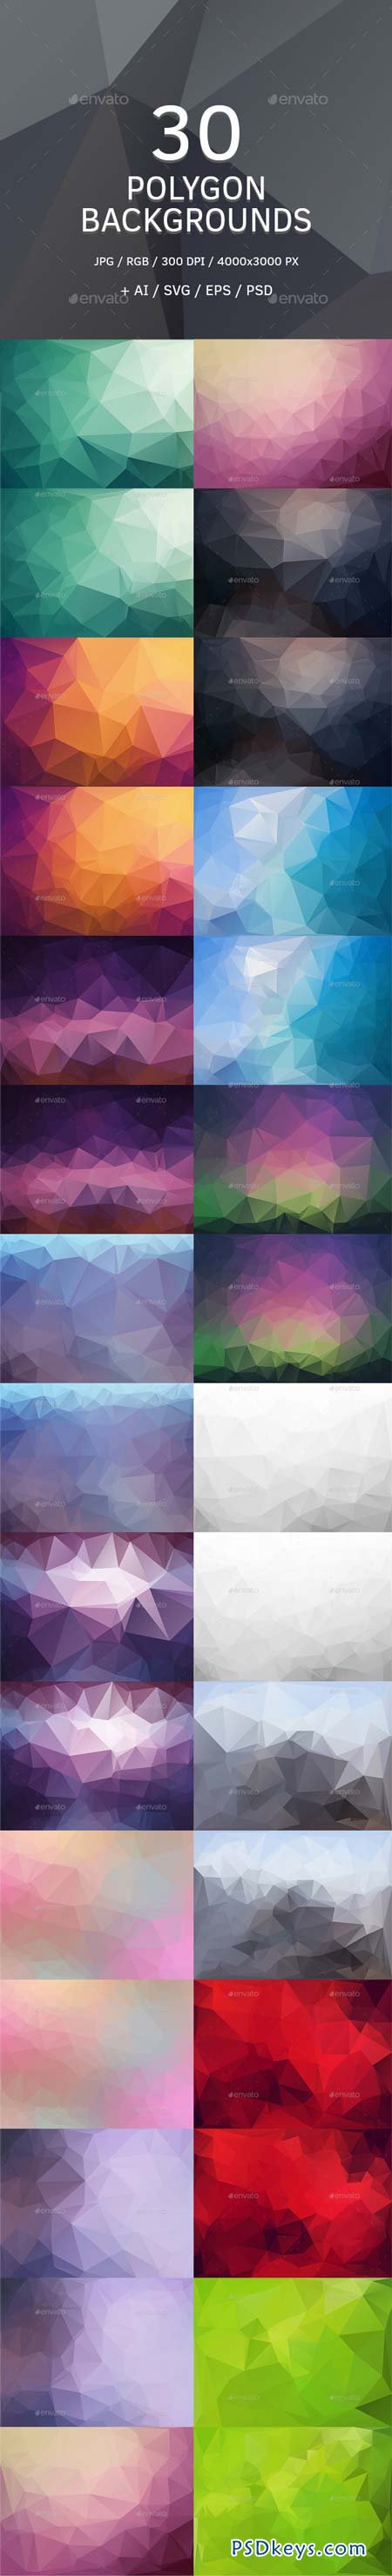 Polygon Backgrounds or Triangle Textures